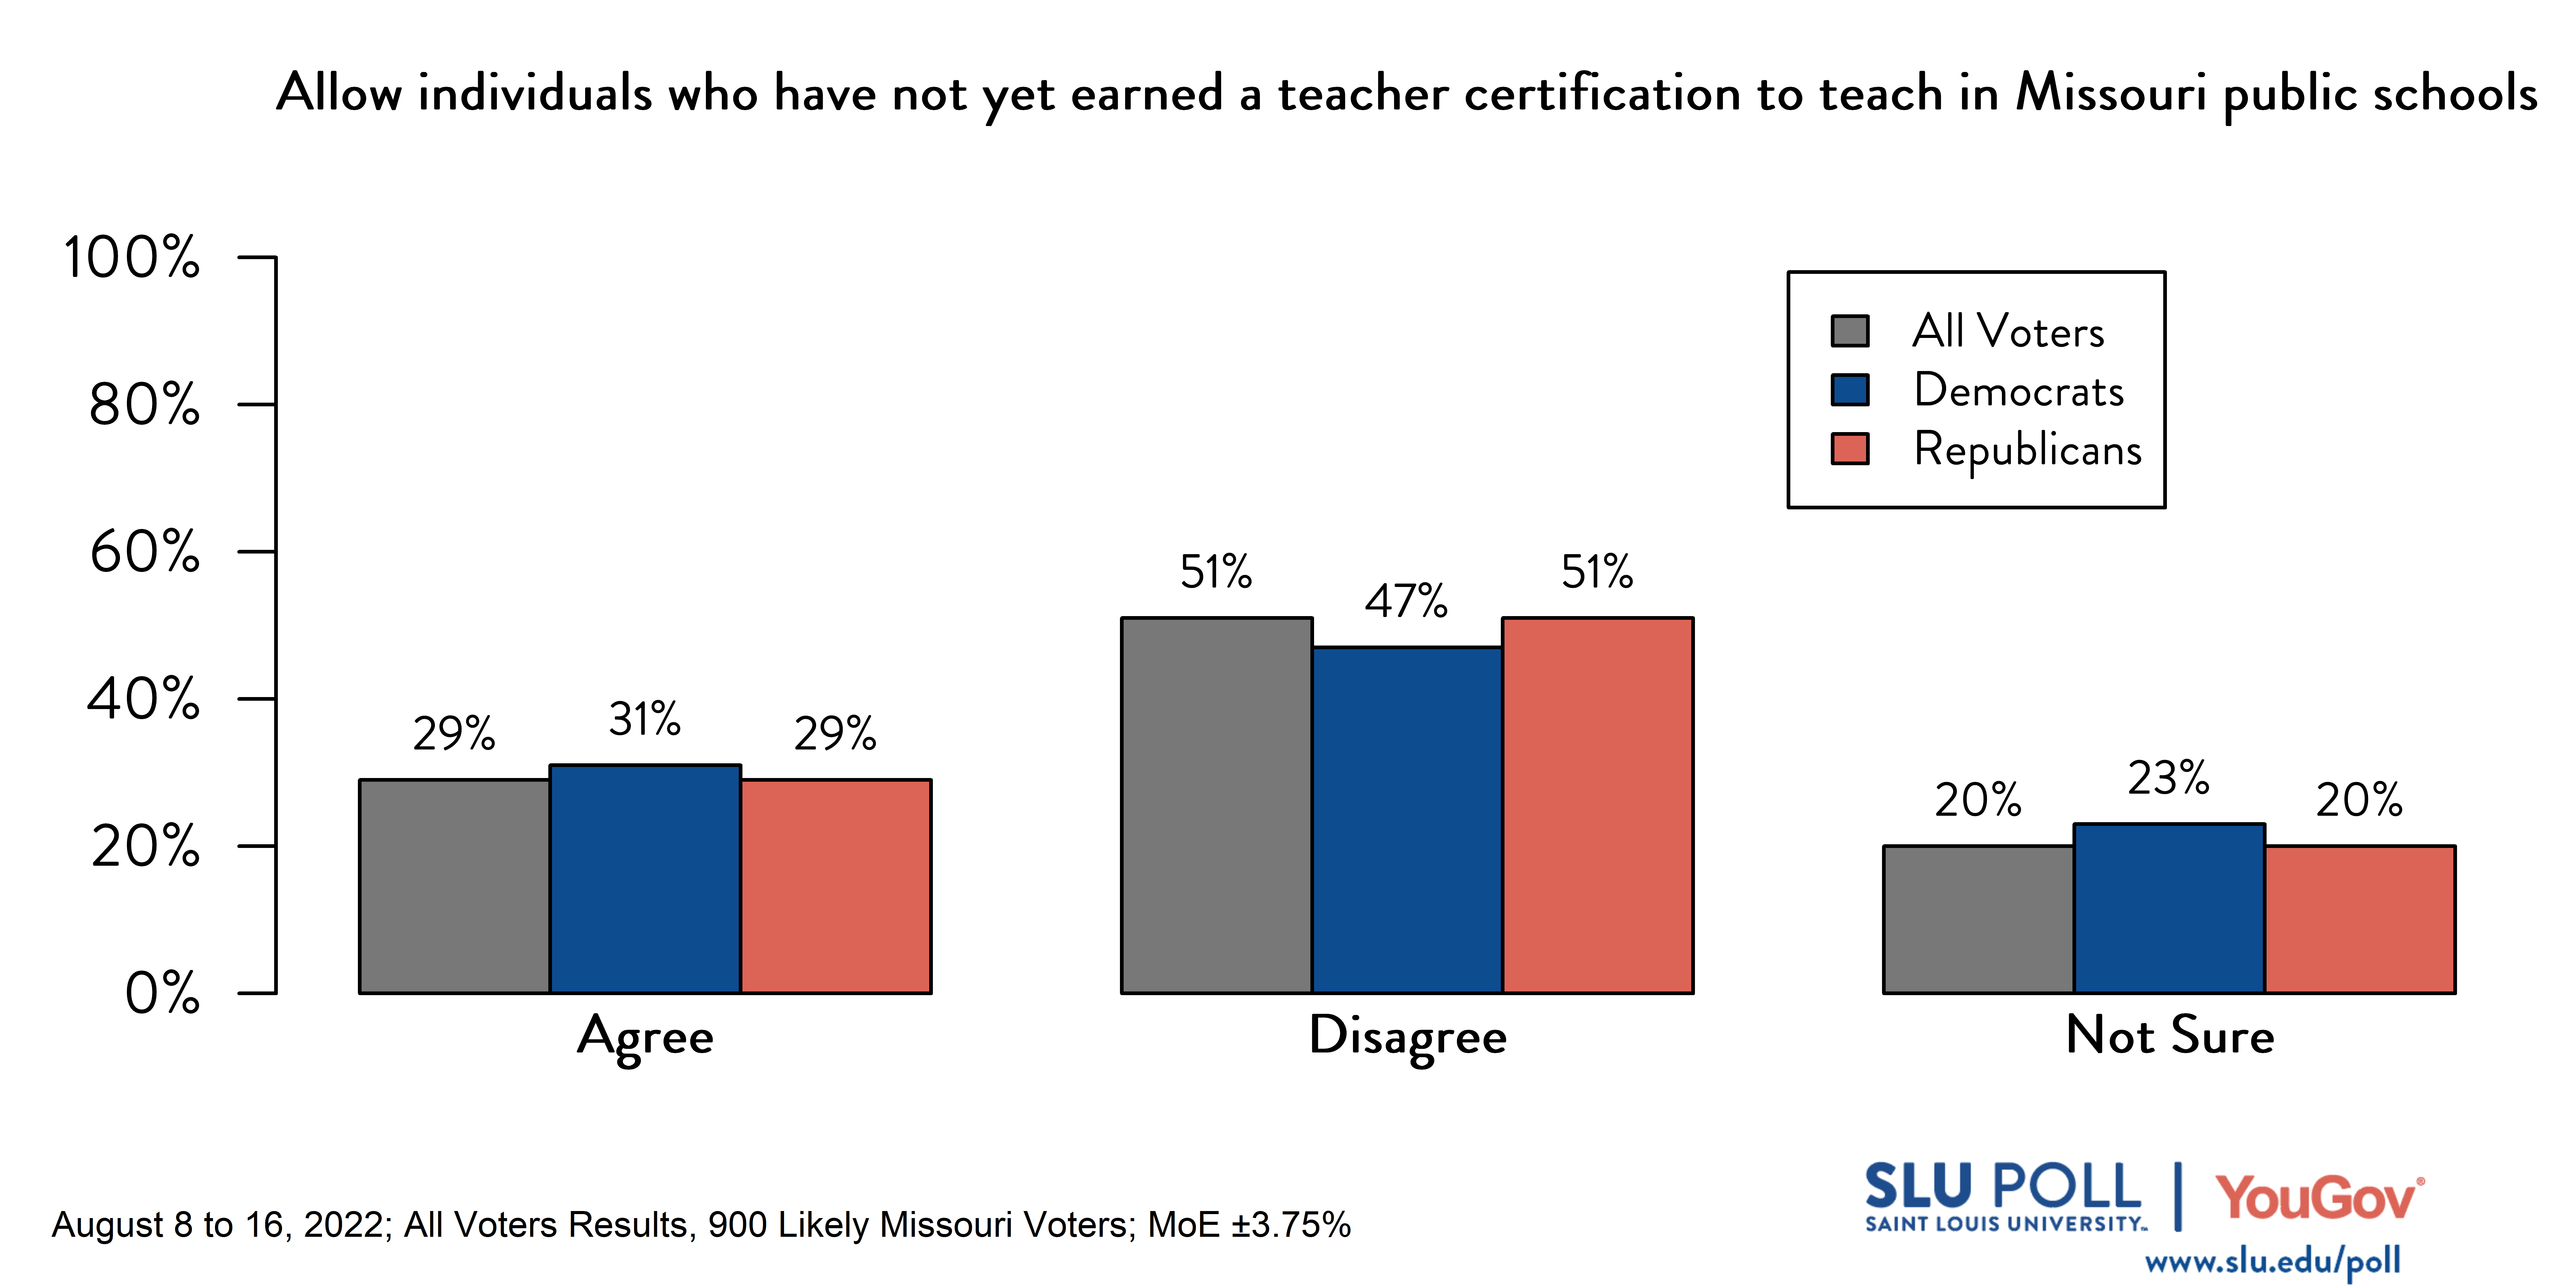 Likely voters' responses to 'Do you agree or disagree with the following statements? Allow individuals who have not yet completed their training or earned a teacher certification to teach in Missouri public schools.': 29% Agree, 51% Disagree, and 20% Not Sure. Democratic voters' responses: ' 31% Agree, 47% Disagree, and 23% Not Sure. Republican voters' responses: 29% Agree, 51% Disagree, and 20% Not Sure.